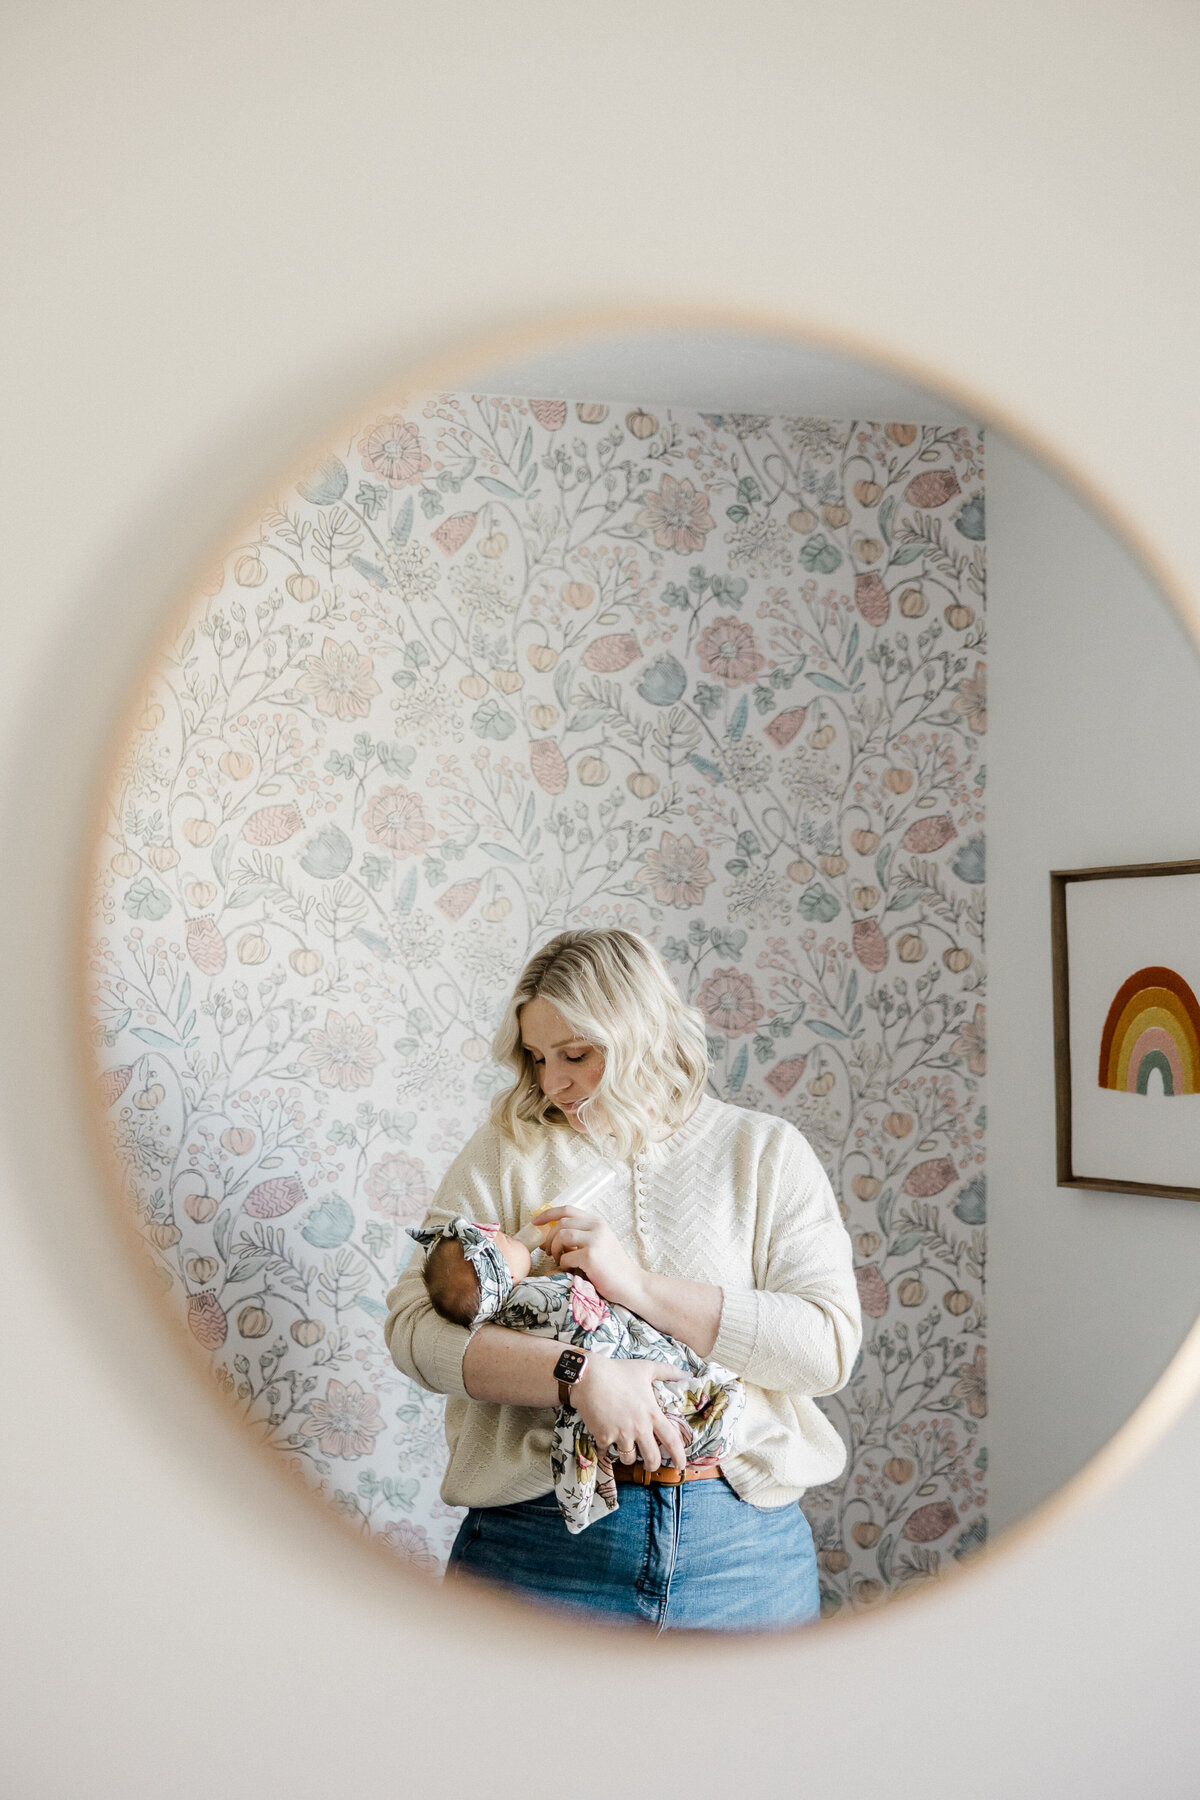 reflection in the mirror of mom holding newborn baby